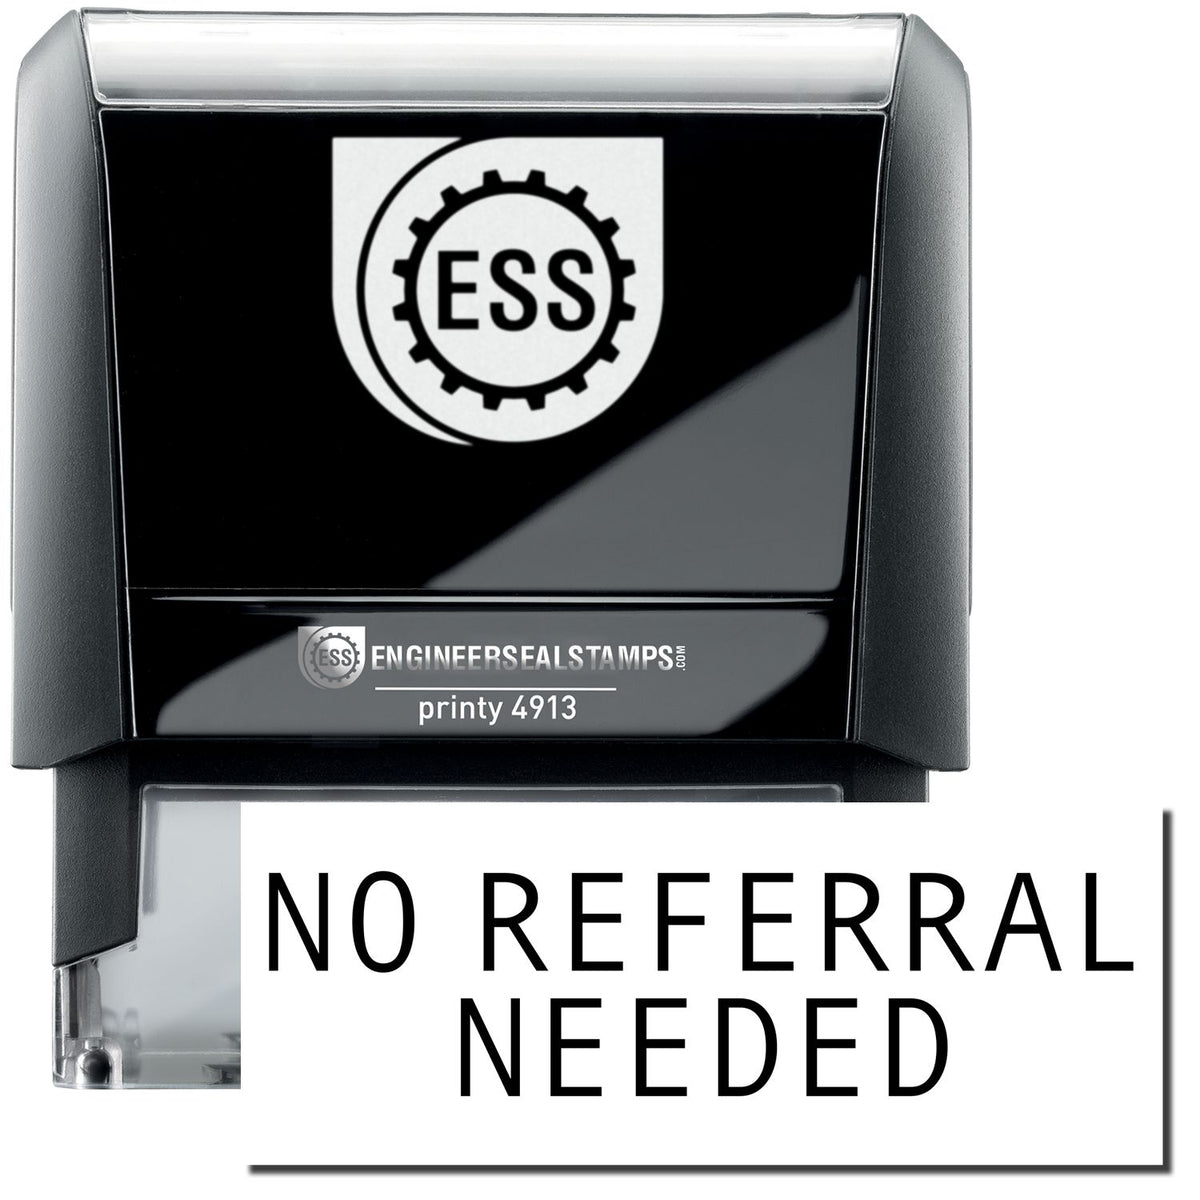 A self-inking stamp with a stamped image showing how the text &quot;NO REFERRAL NEEDED&quot; in a large font is displayed by it.